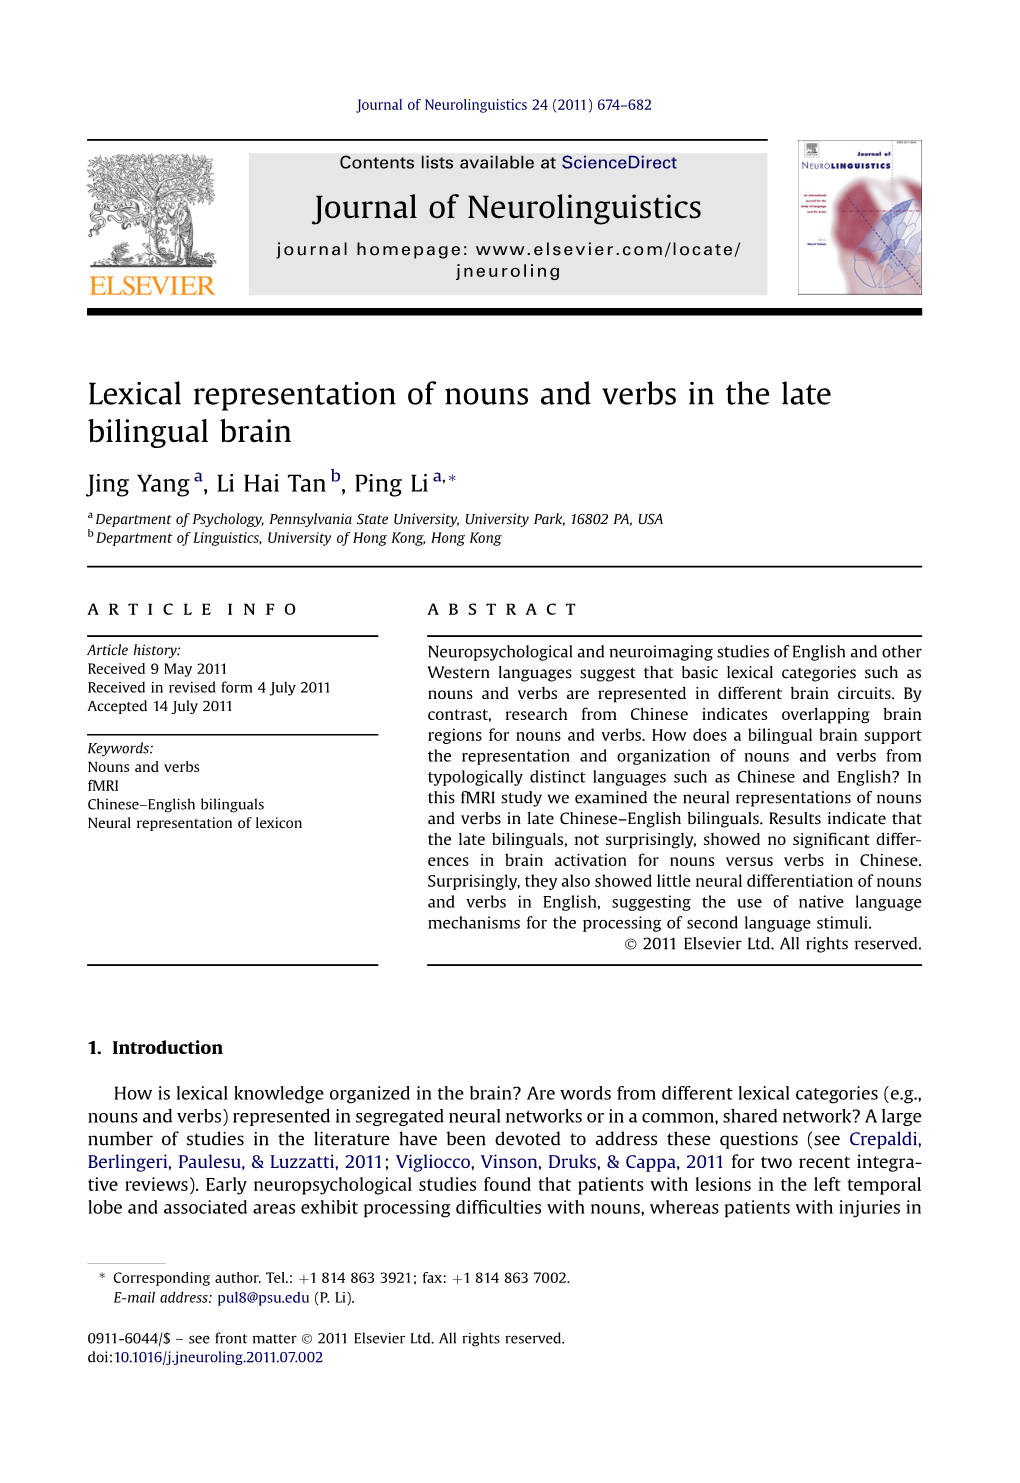 Lexical Representation of Nouns and Verbs in the Late Bilingual Brain